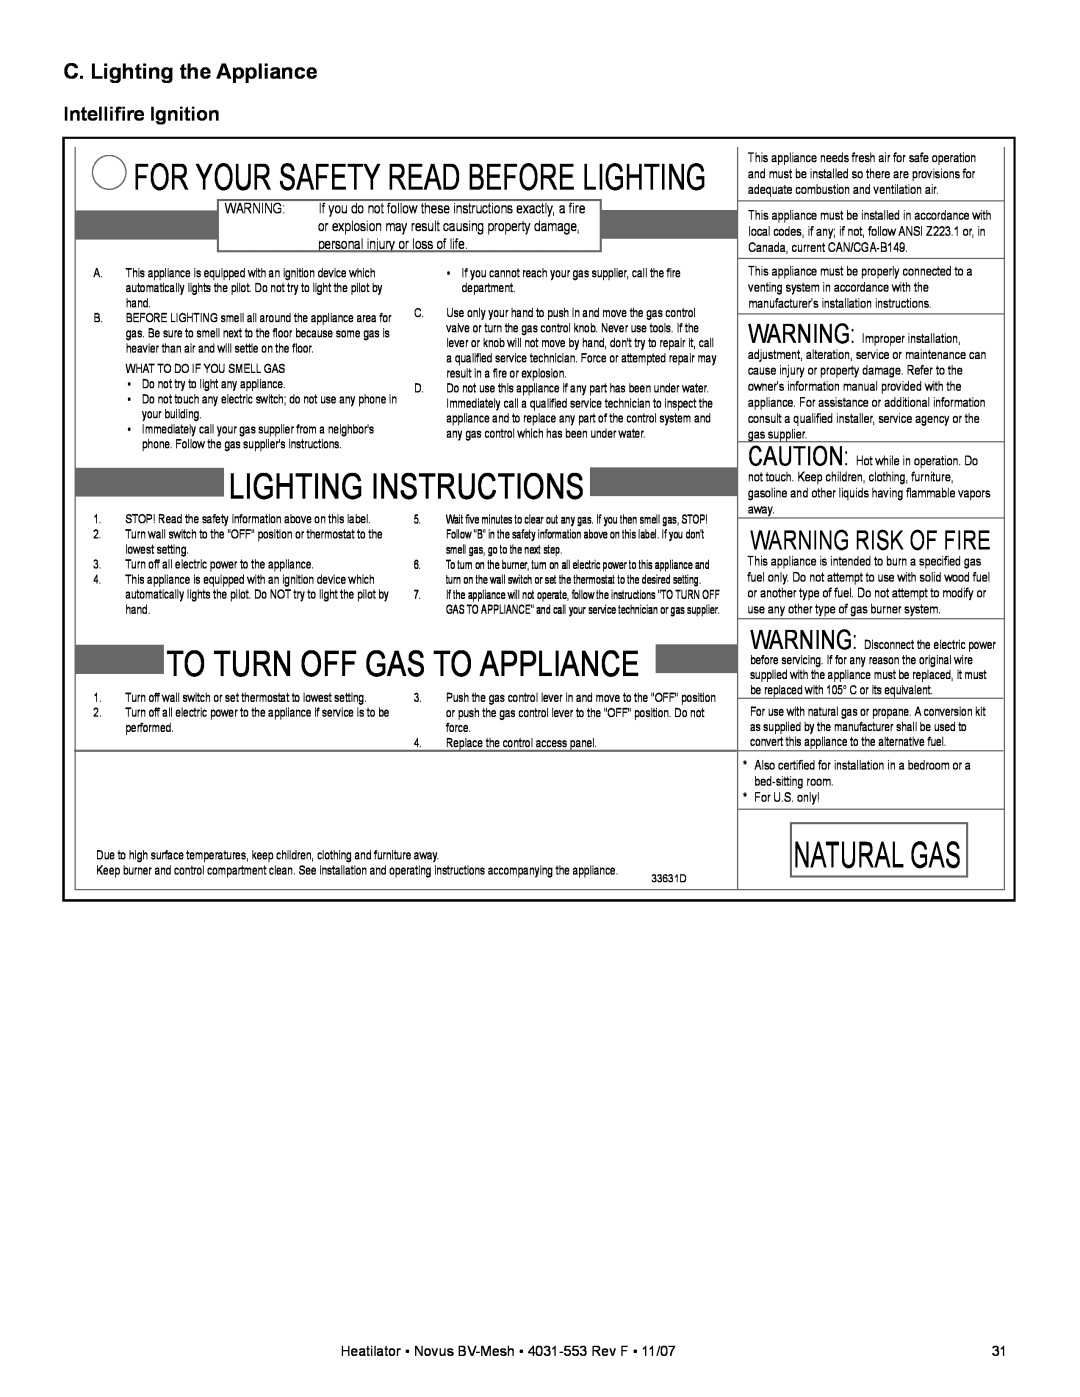 Heatiator NB3933M Warning Risk Of Fire, C. Lighting the Appliance, Natural Gas, Lighting Instructions, Intelliﬁre Ignition 